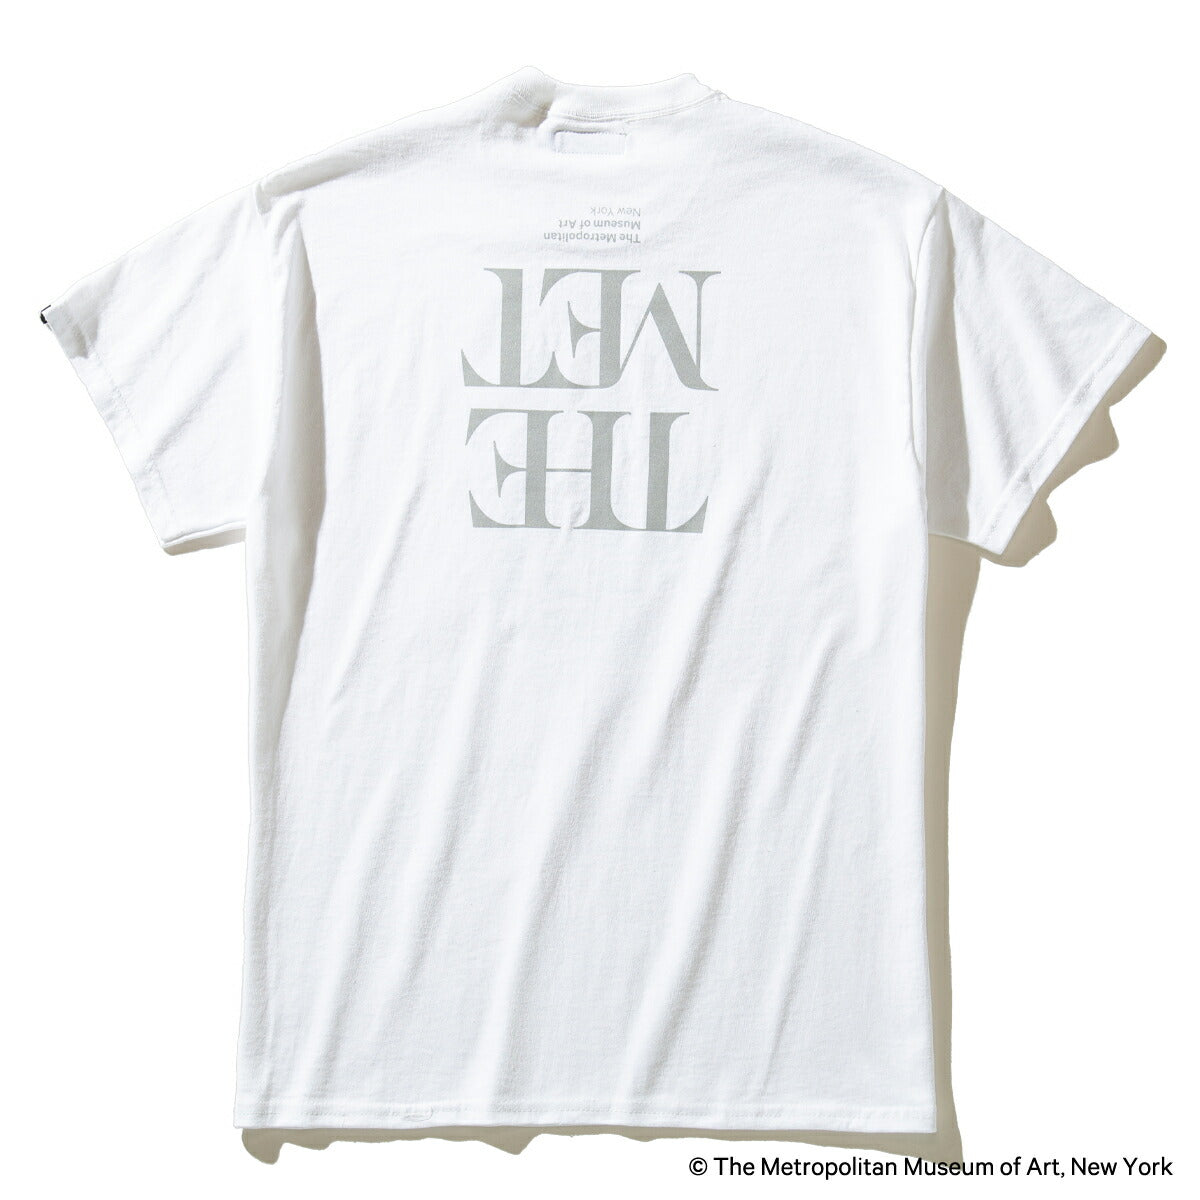 THE MET REFLECTIVE LOGO TEE for